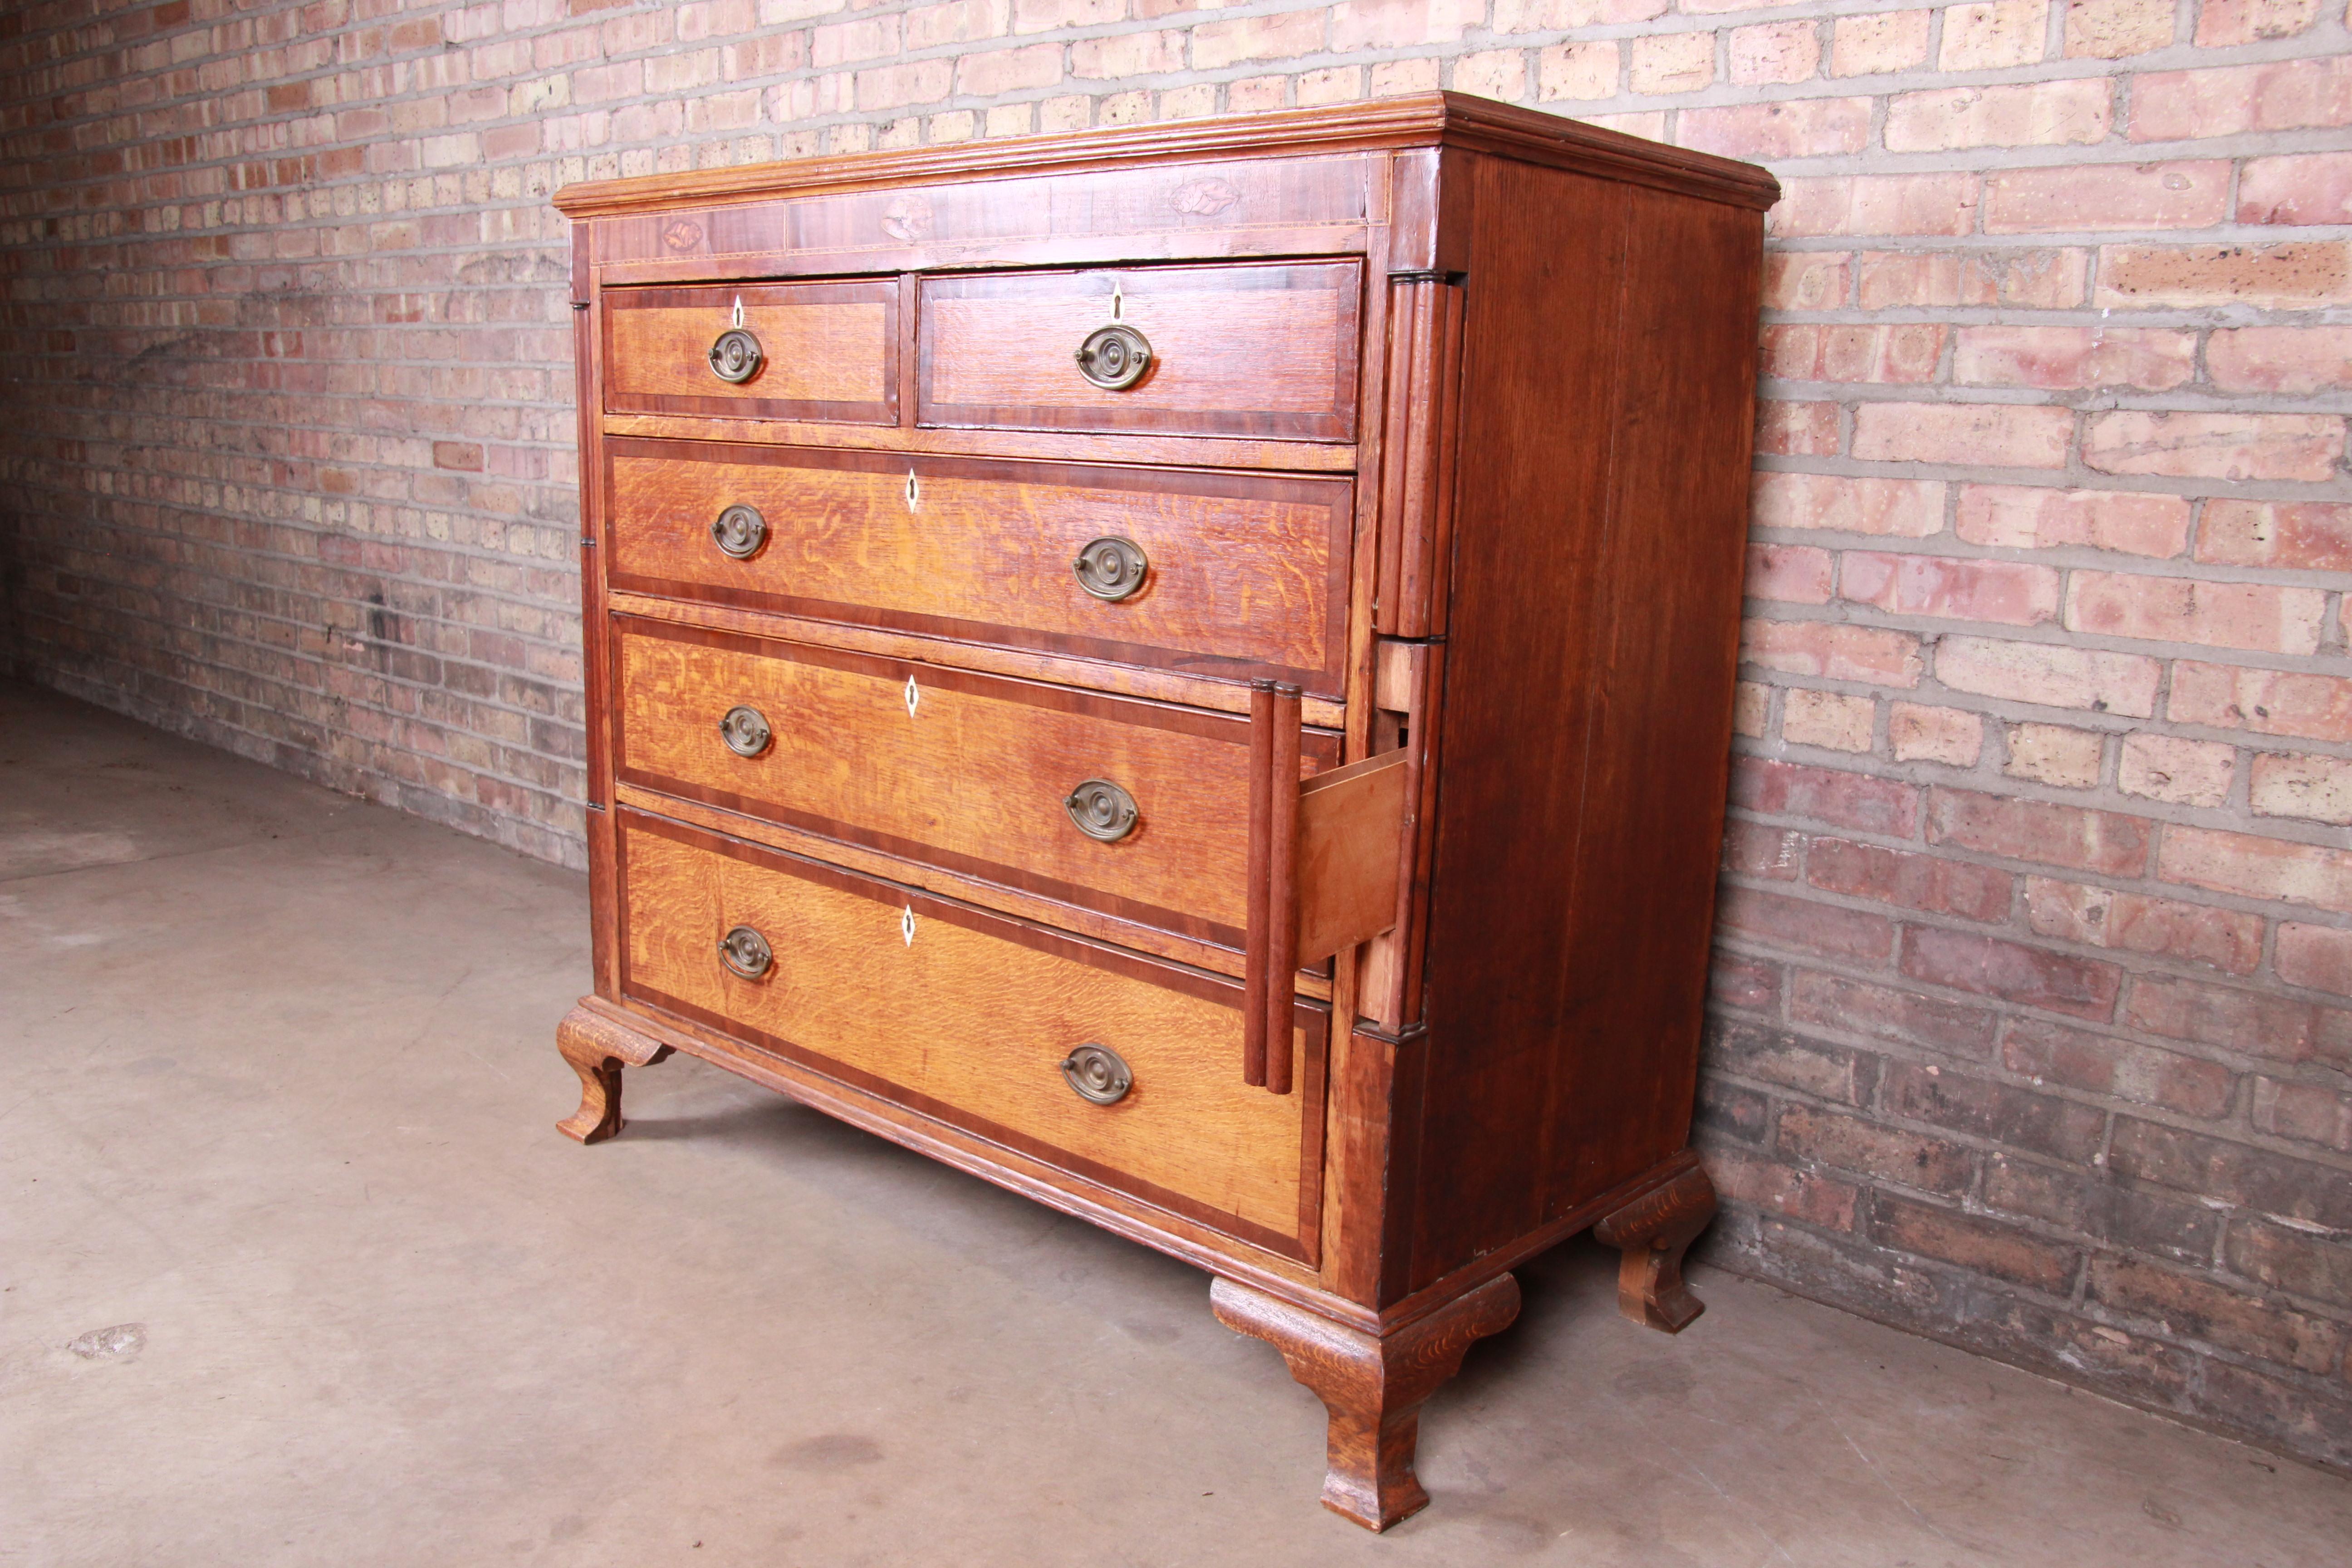 Early American Oak, Inlaid Mahogany, and Bone Inlay Chest of Drawers, circa 1820 5